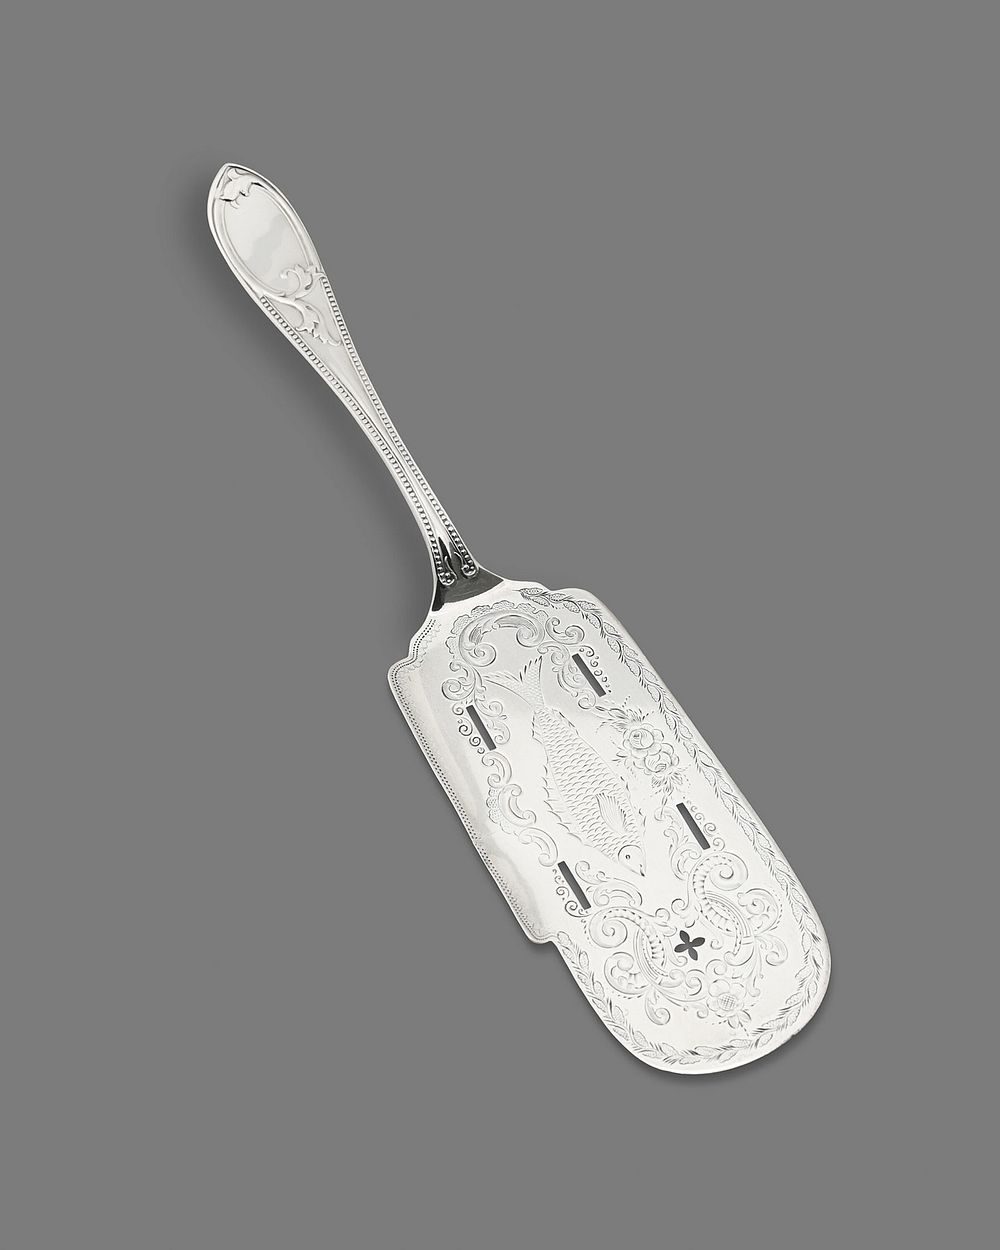 Fish Slice by Harding, Newell and Company